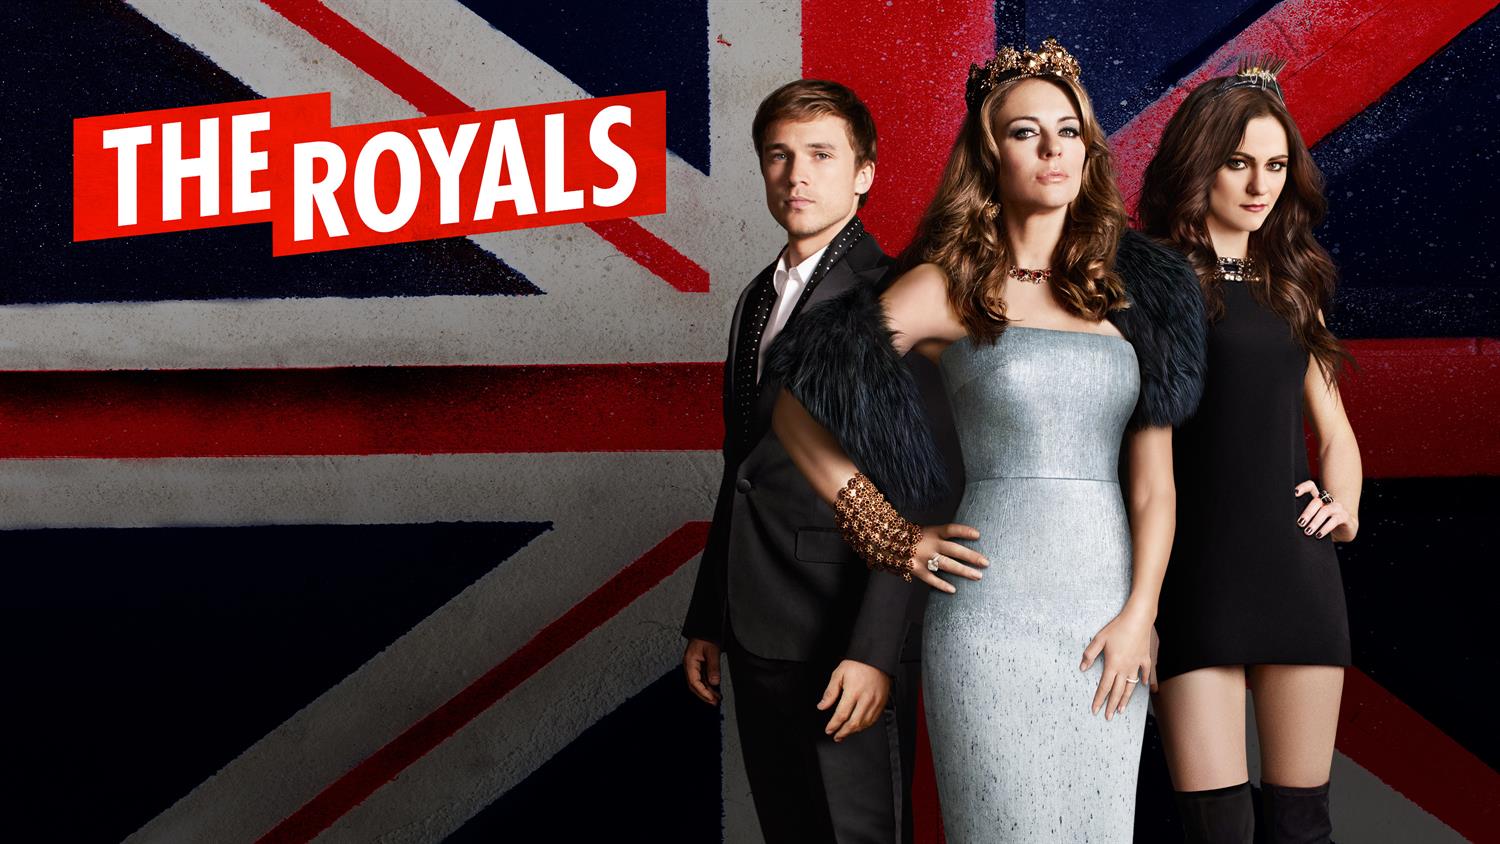 When Does The Royals Season 3 Start? Premiere Date